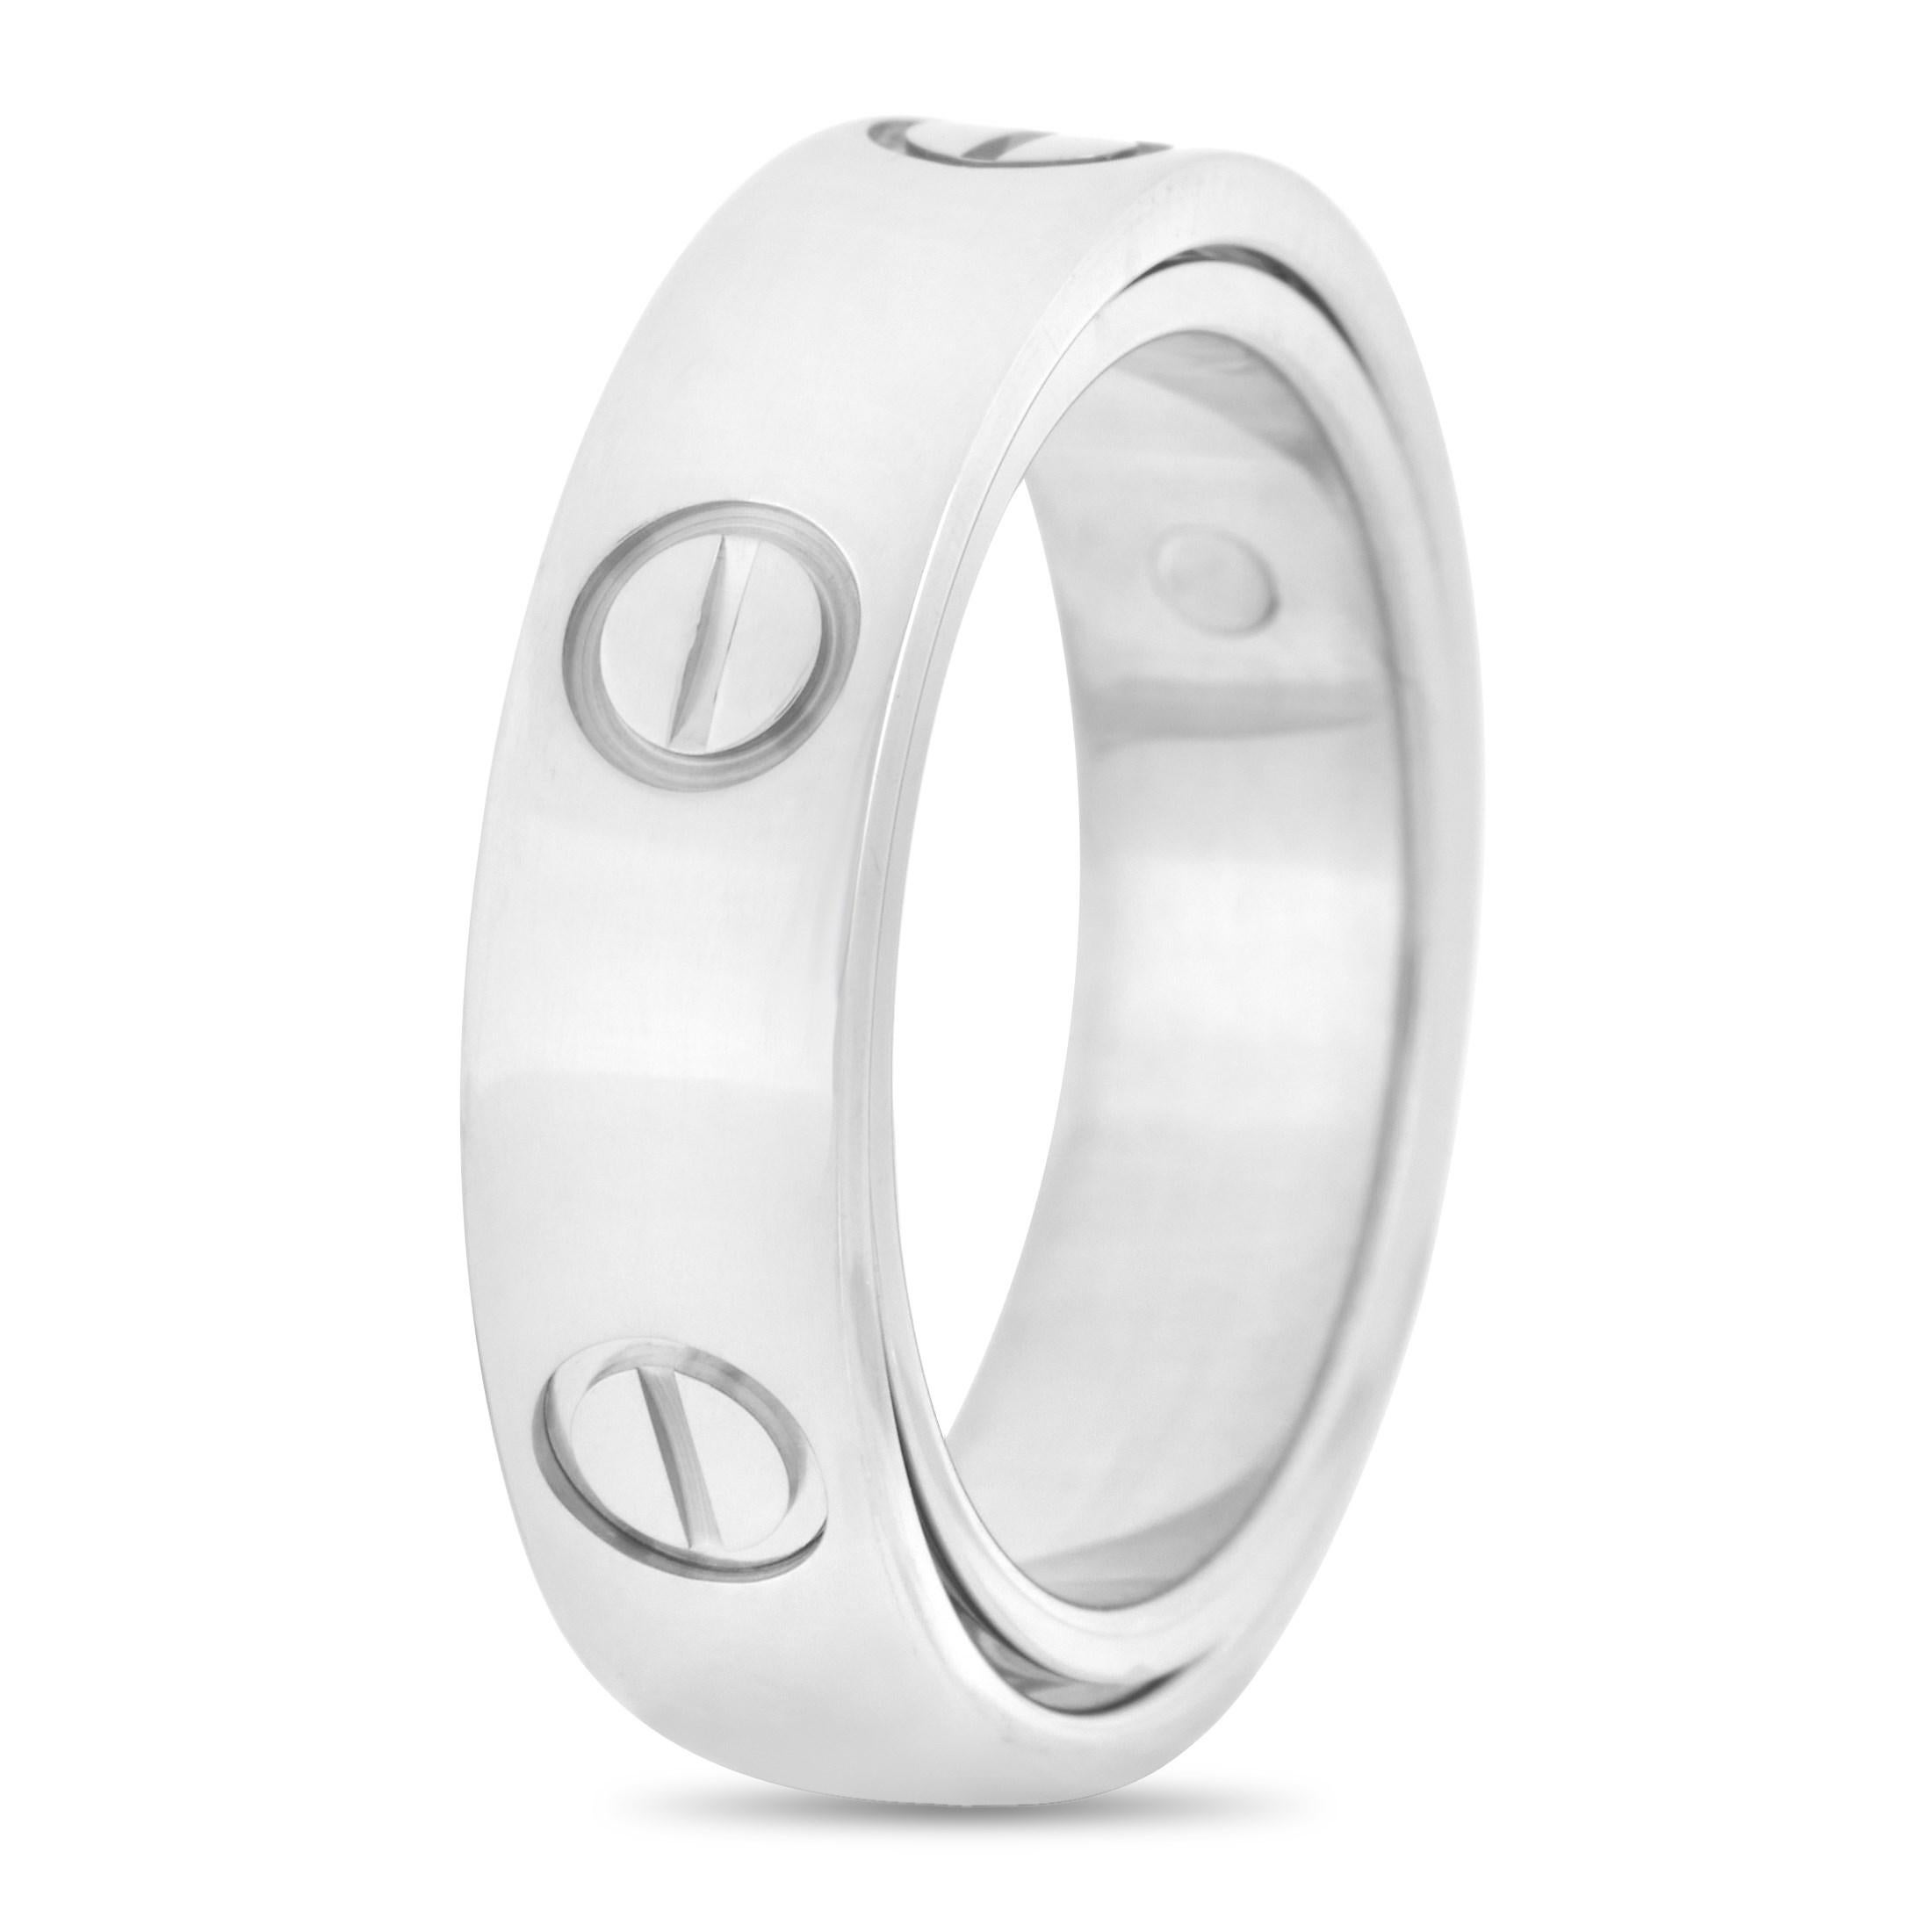 This Cartier love ring is simple but exceptional. It’s created from 18k white gold and features fashionable circle like inscriptions. The ring weighs 10.6 grams with a band thickness of 5mm. 

The ring is offered in estate condition and comes with a